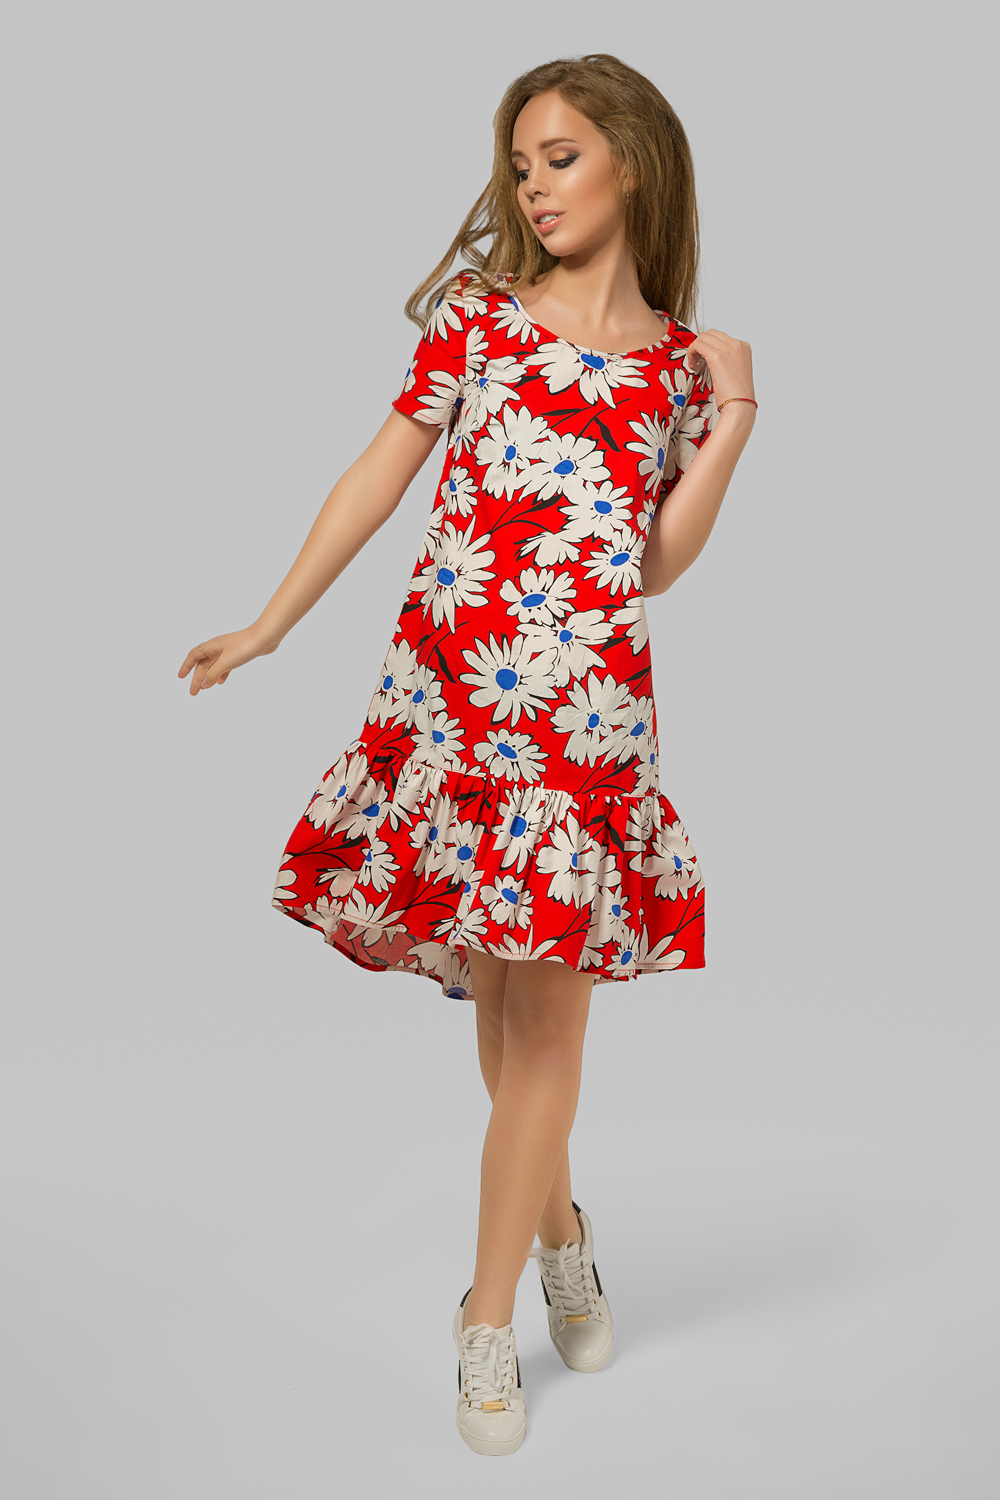 Floral print dress in red